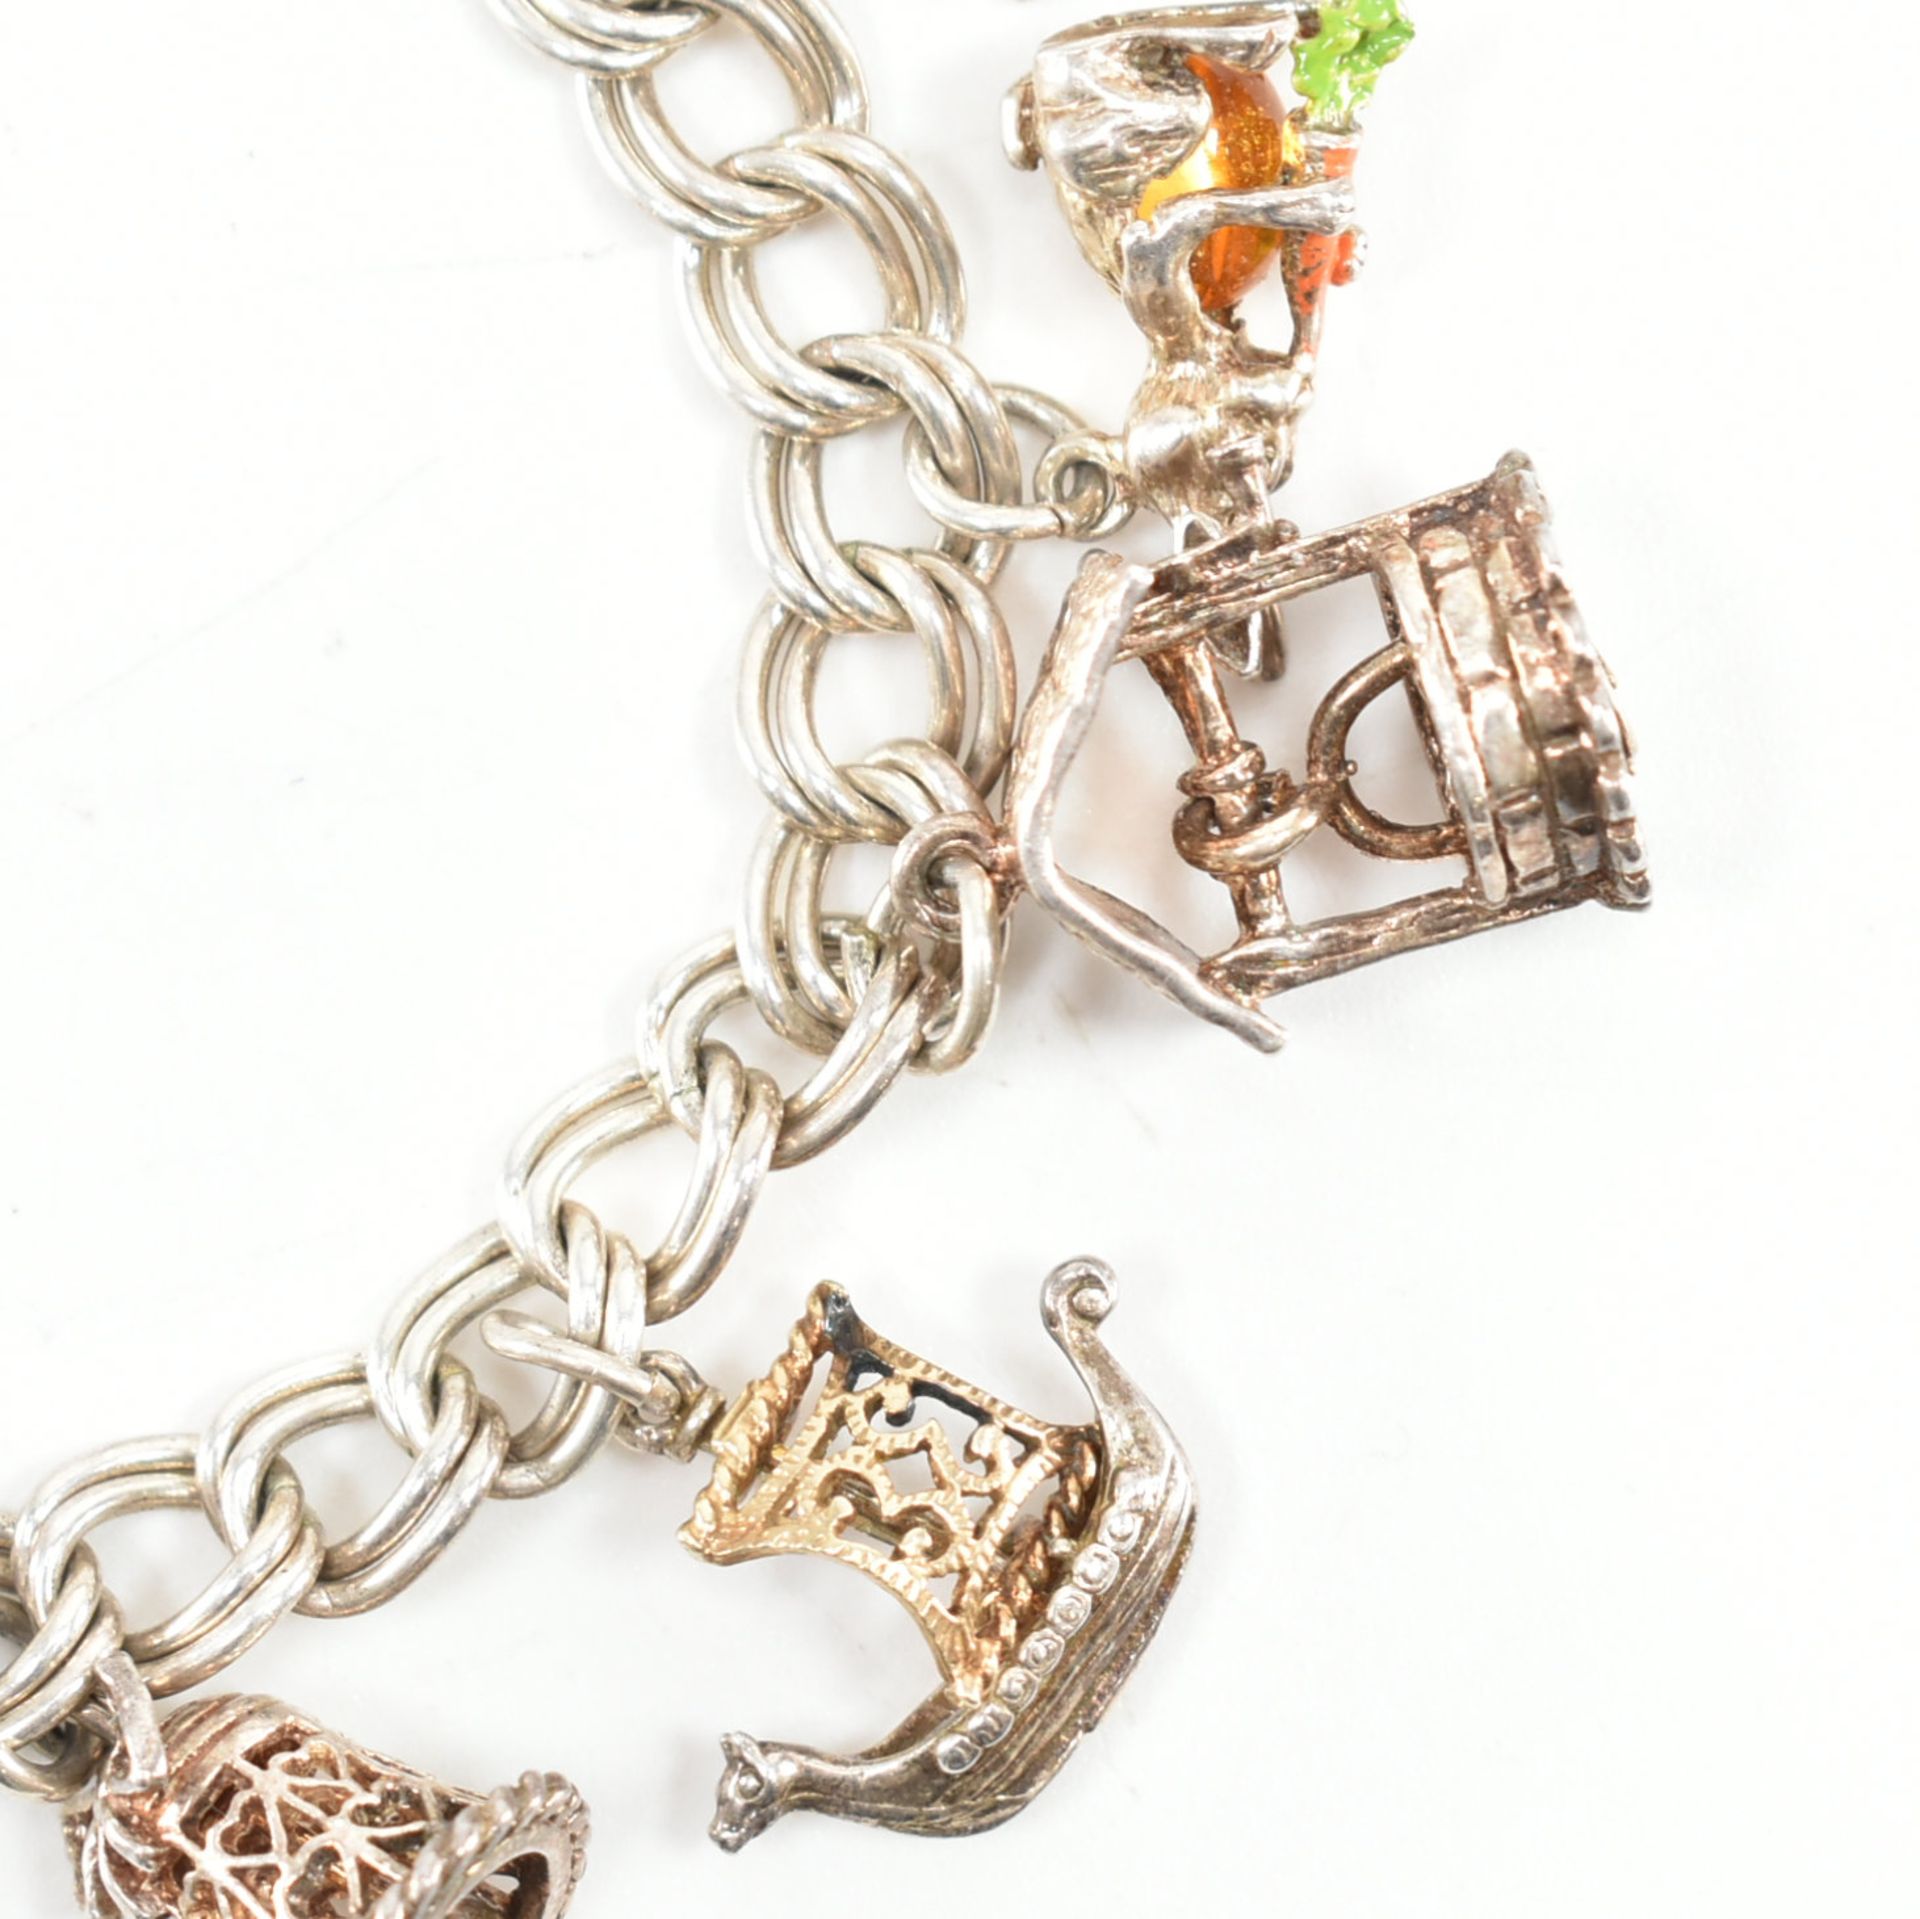 HALLMARKED SILVER CHARM BRACELET & CHARMS - Image 3 of 9